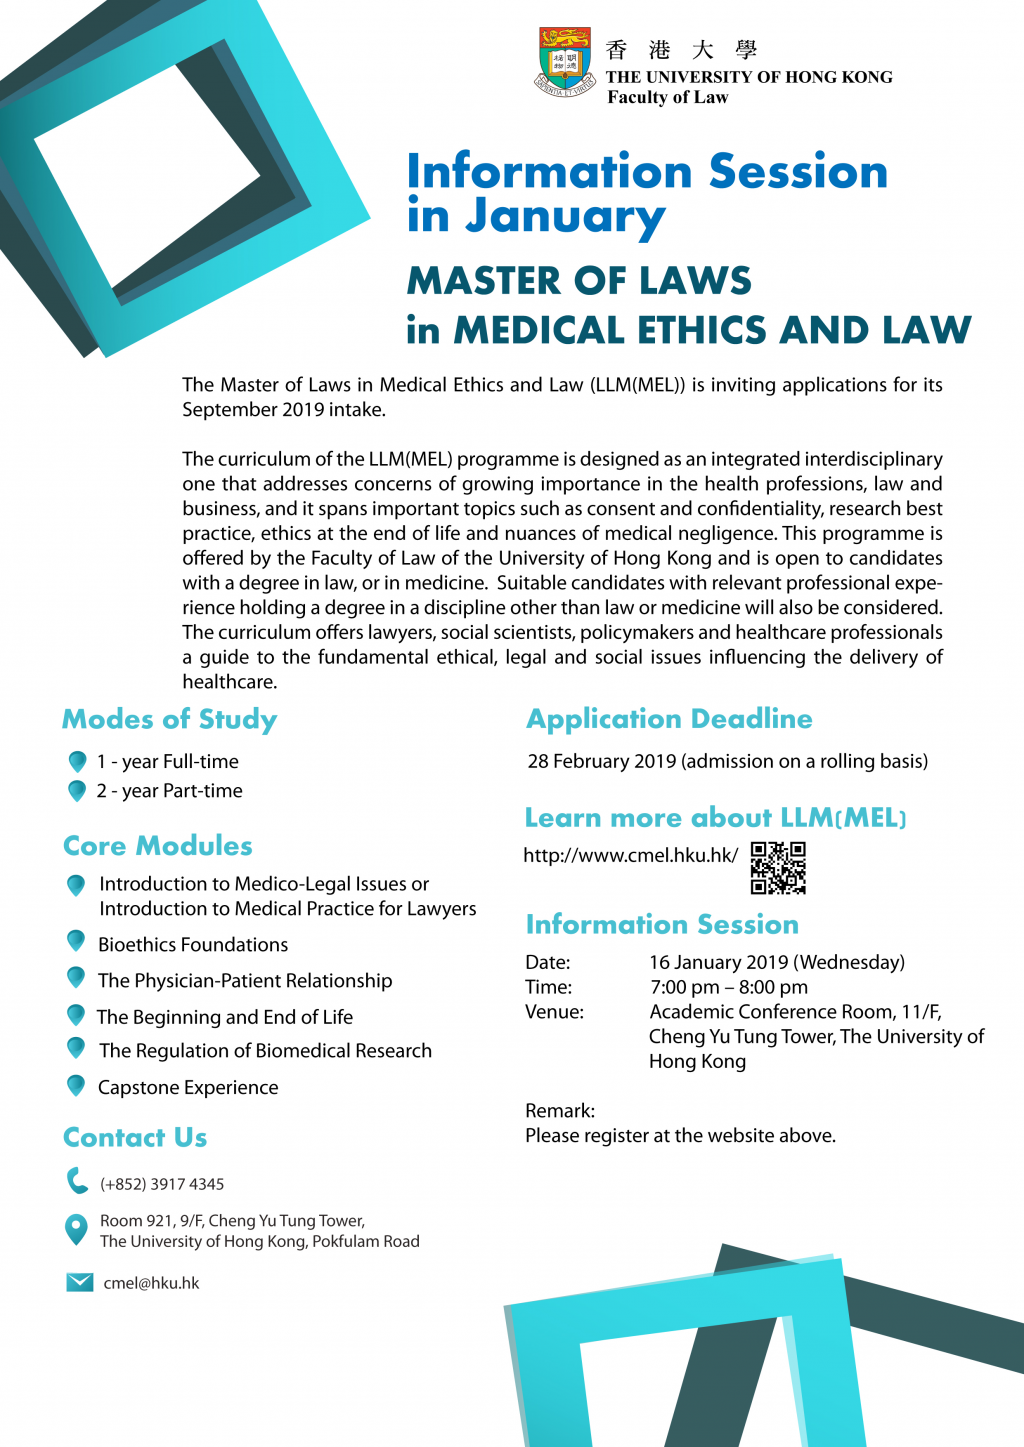 Information Session - Master of Laws in Medical Ethics and Law